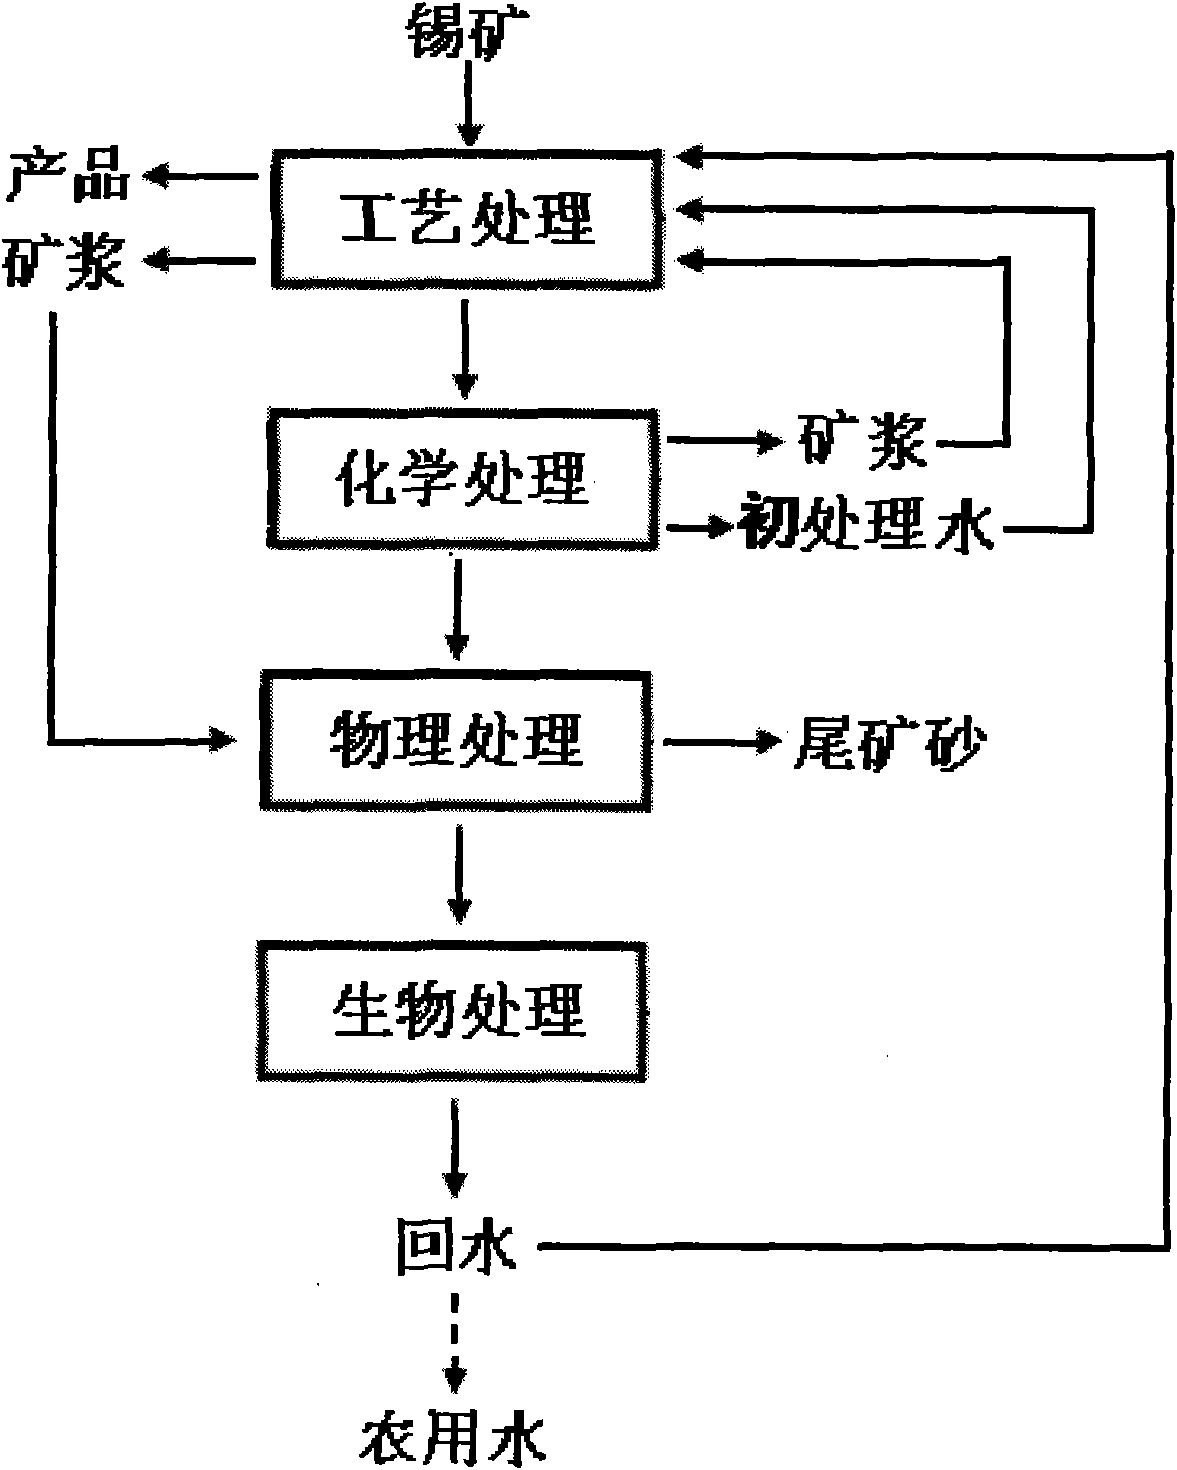 Four-step method for processing and recycling tin ore floatation wastewater